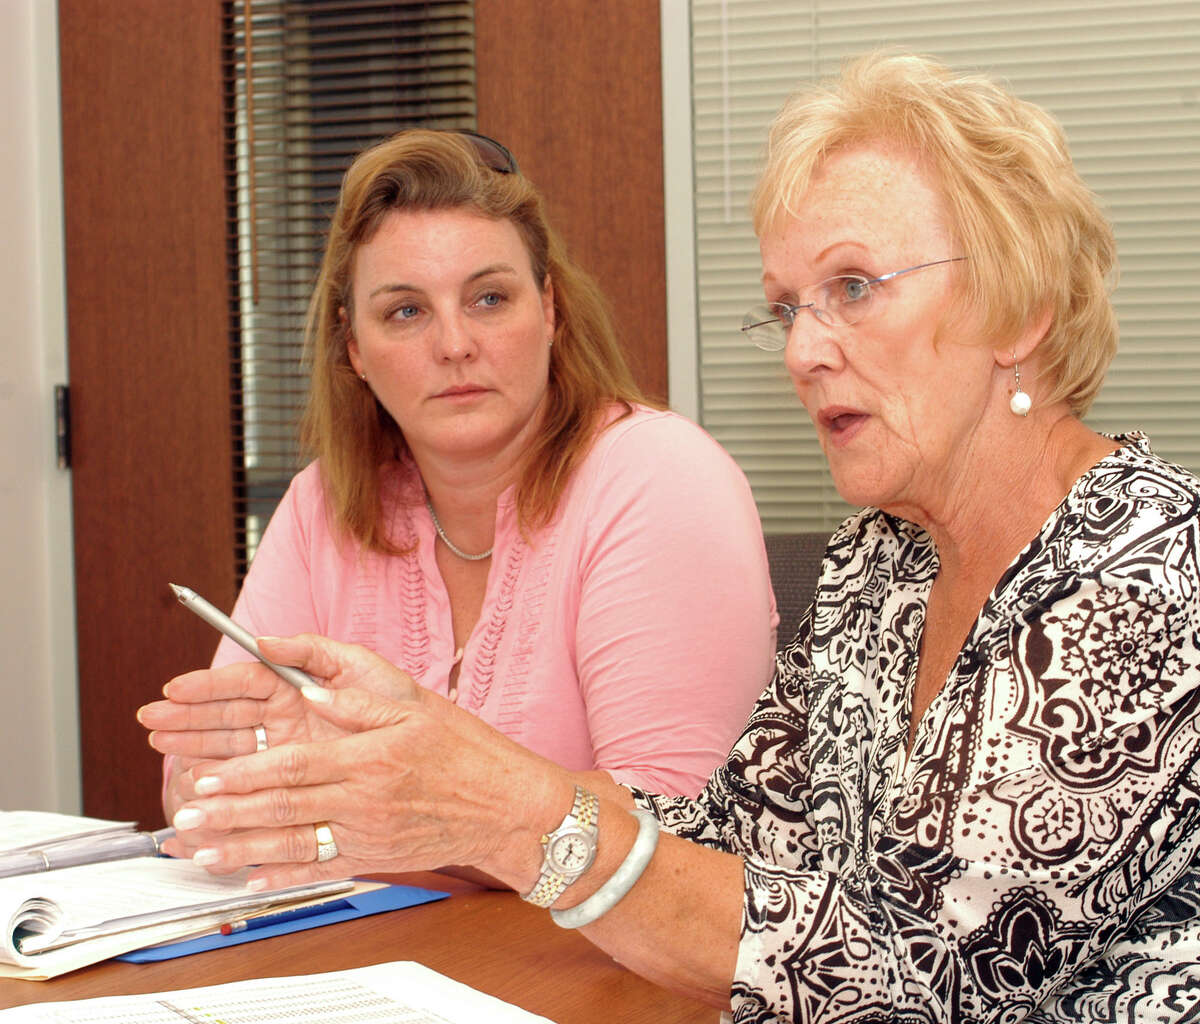 Board of Education Chairman Debbie Leidlein, left, and Newtown First Selectman Pat Llodra discuss the townís budget at a press conference Thursday afternoon, June 28, 2012.